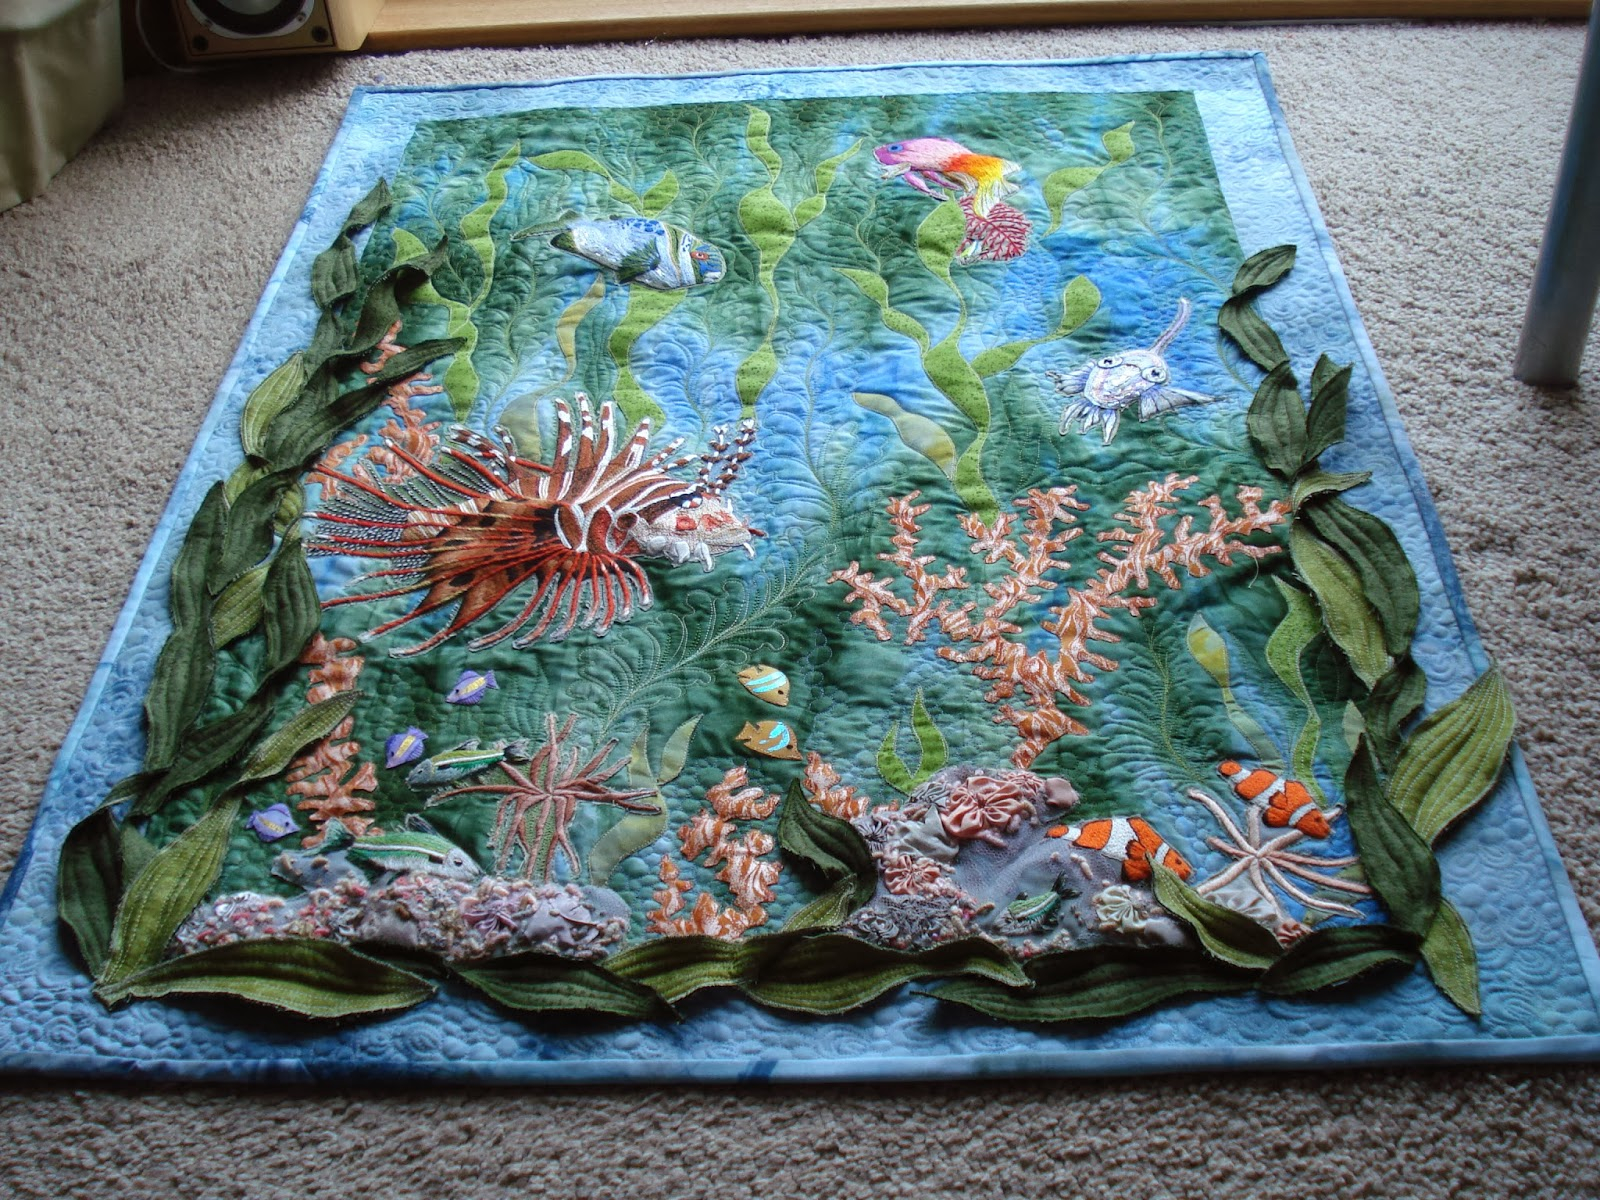 Hand Embroidery Patterns For Baby Quilts The Nifty Stitcher Hand Embroidered Tropical Fish Wall Ralph Lauren